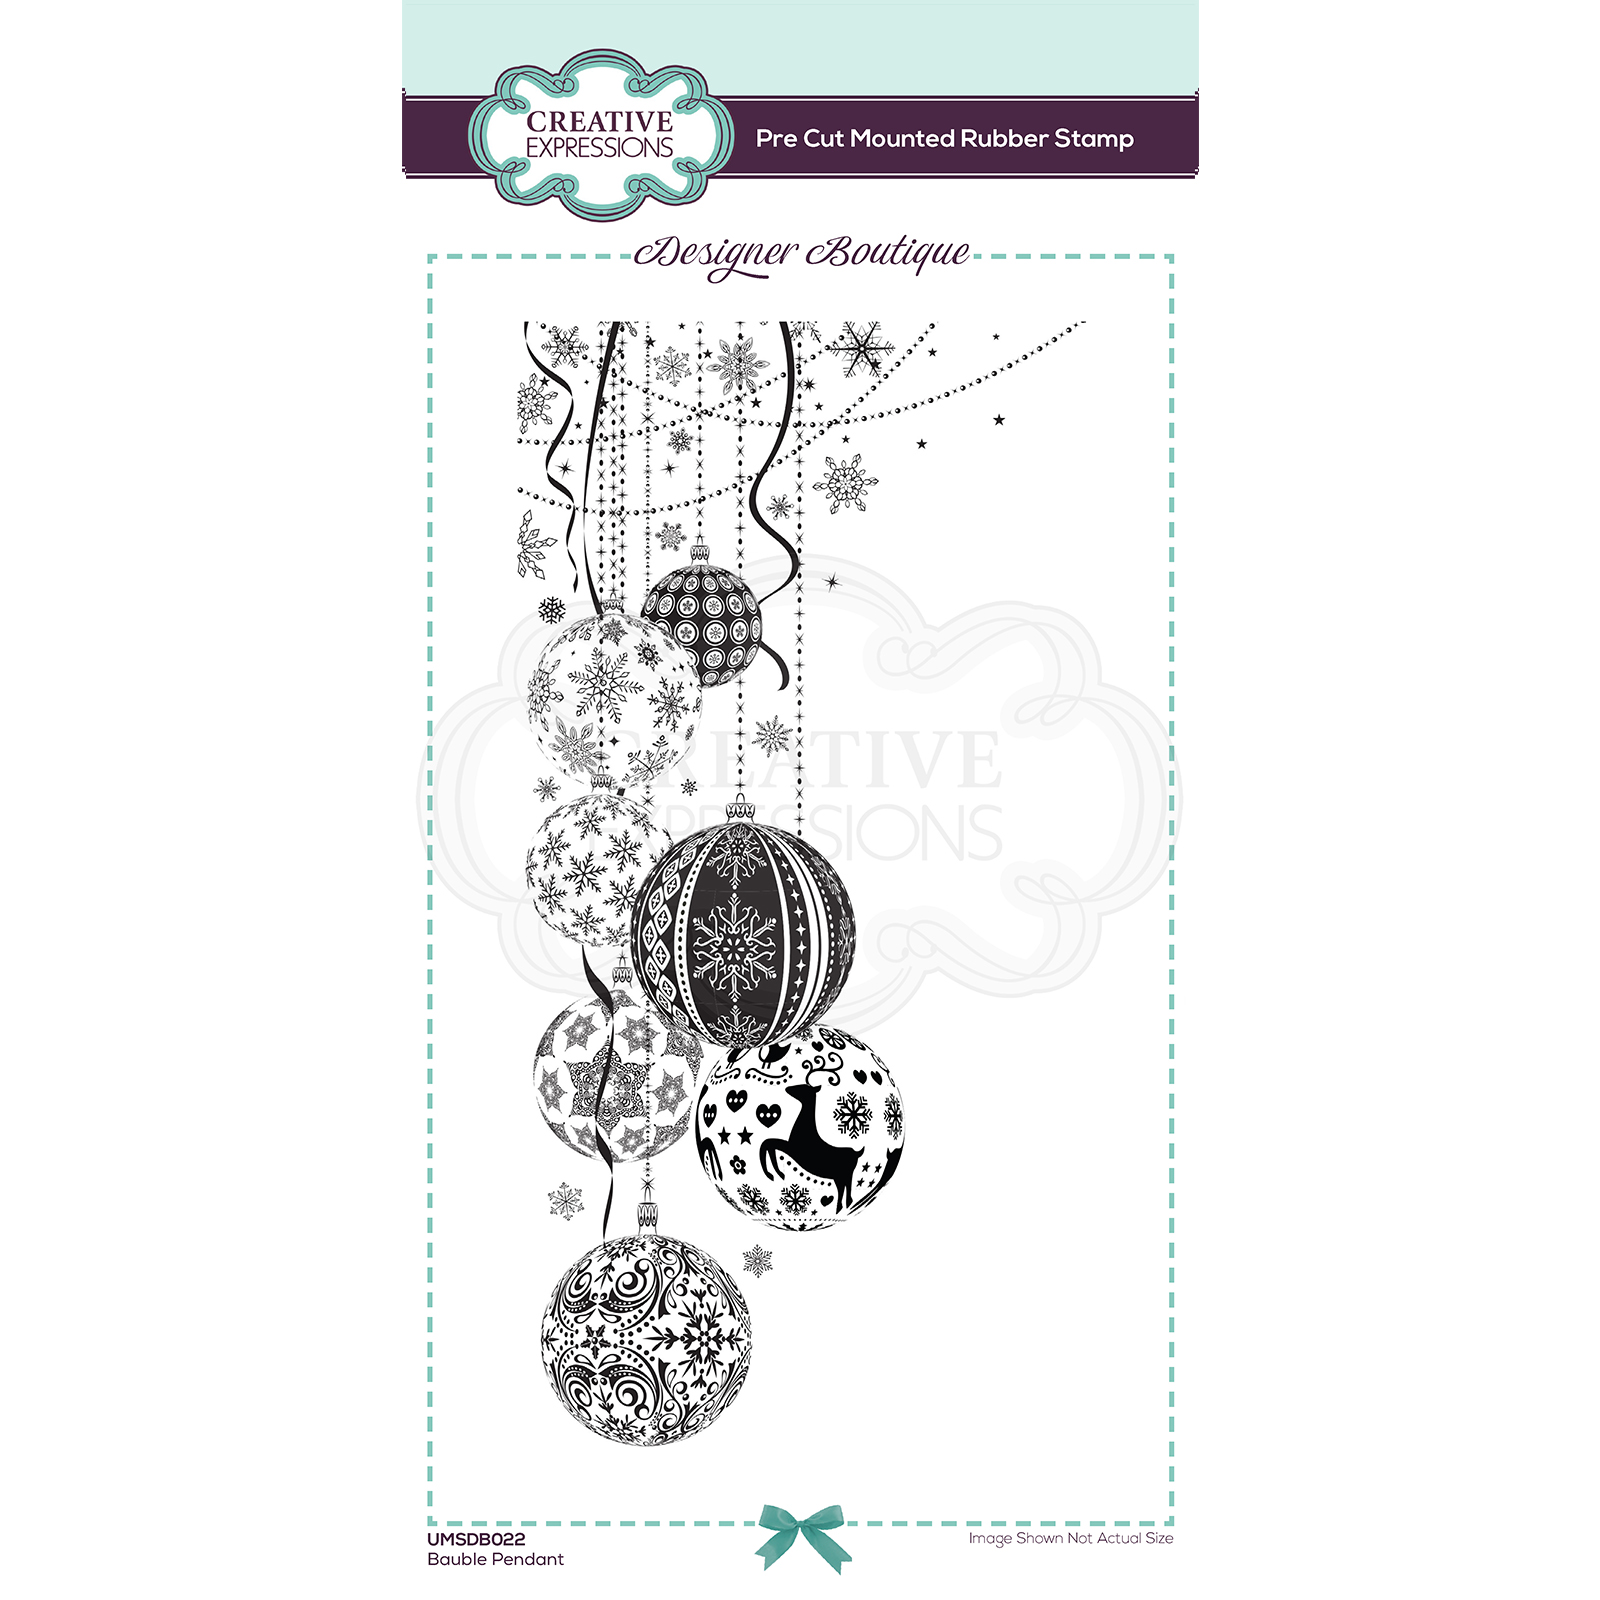 Creative Expressions • Bauble pendant rubber stamp